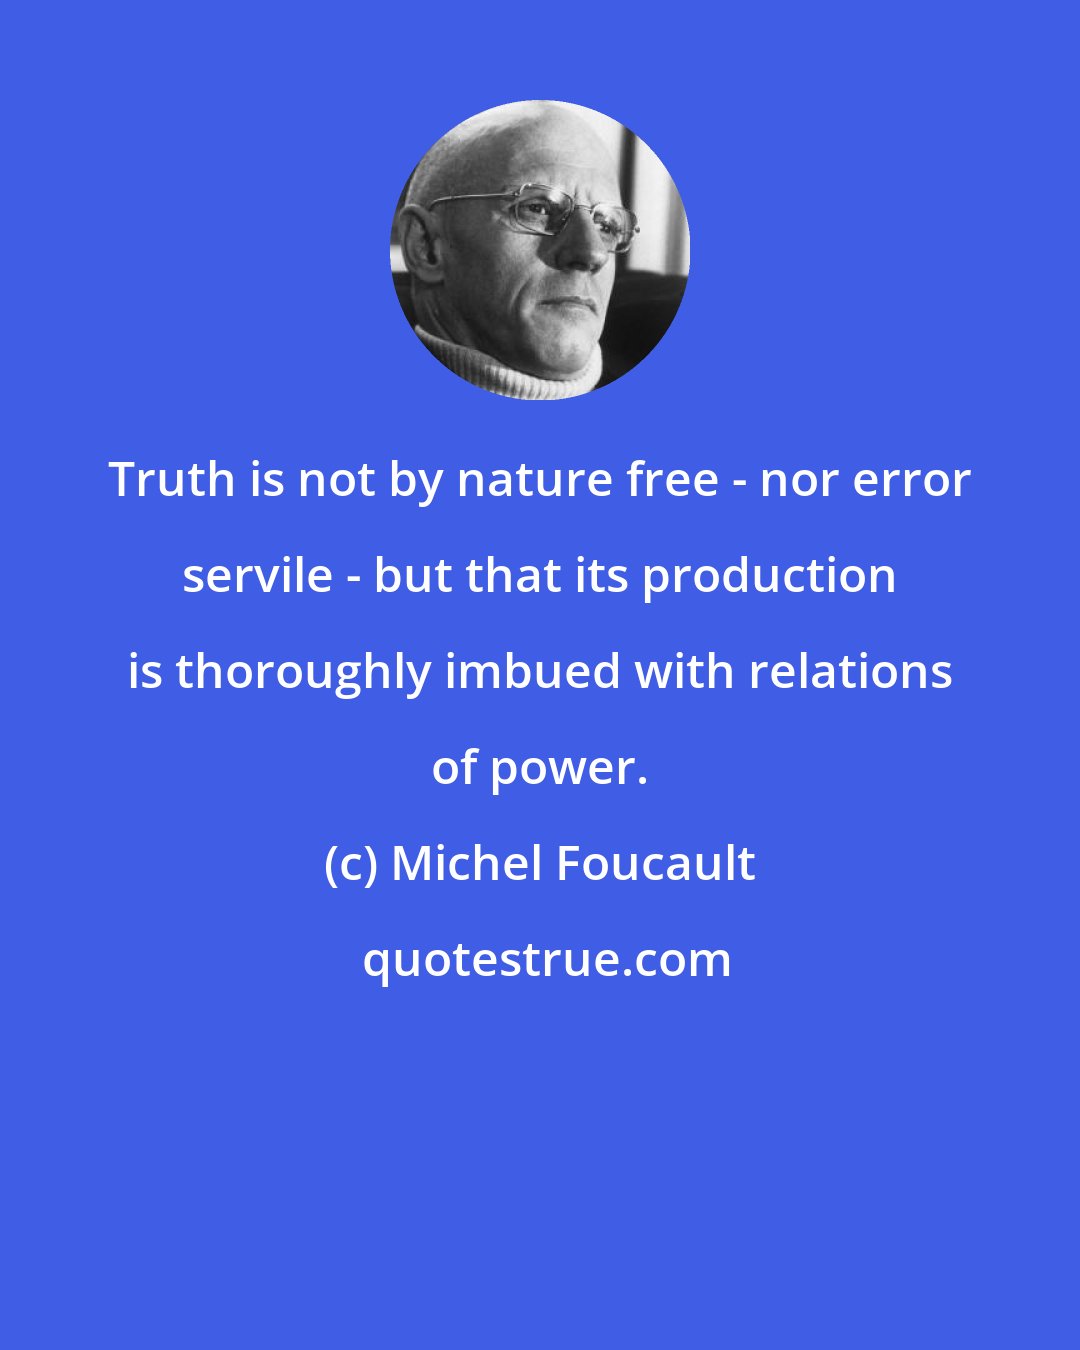 Michel Foucault: Truth is not by nature free - nor error servile - but that its production is thoroughly imbued with relations of power.